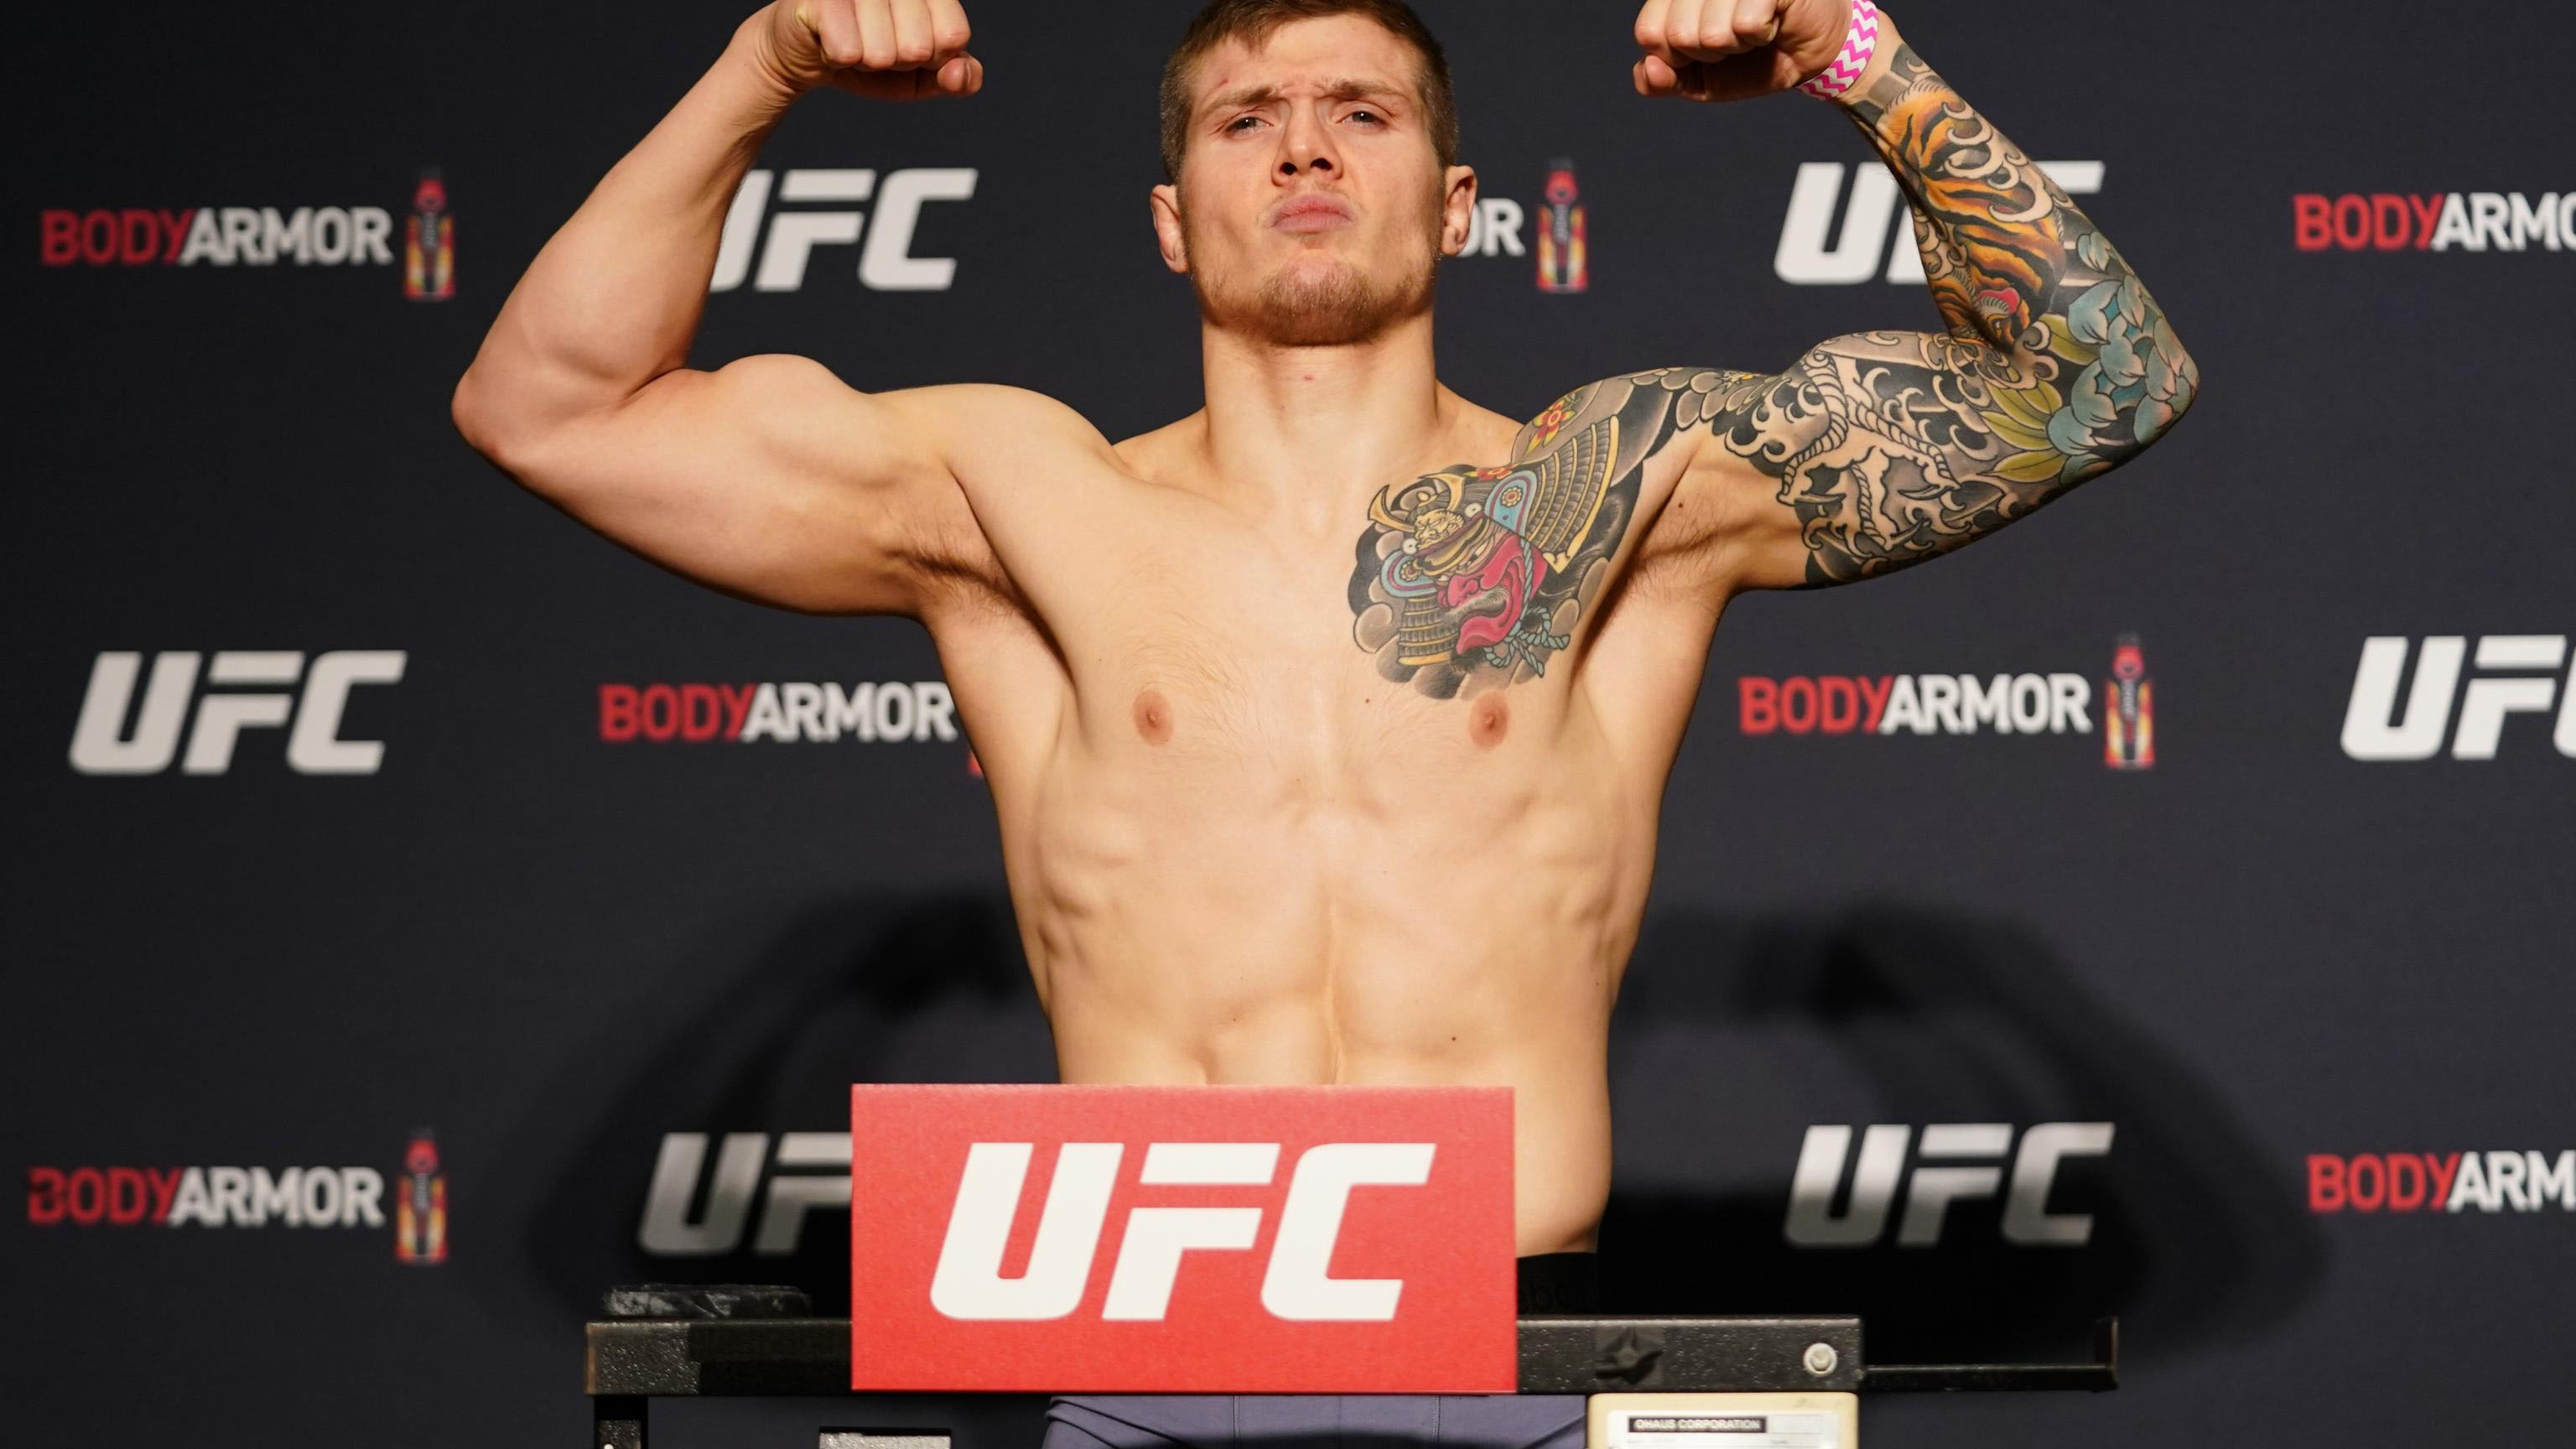 Marvin Vettori (born September 20, 1993) is an Italian mixed martial artist. He is a former Venator Fighting Championship welterweight champion and he...